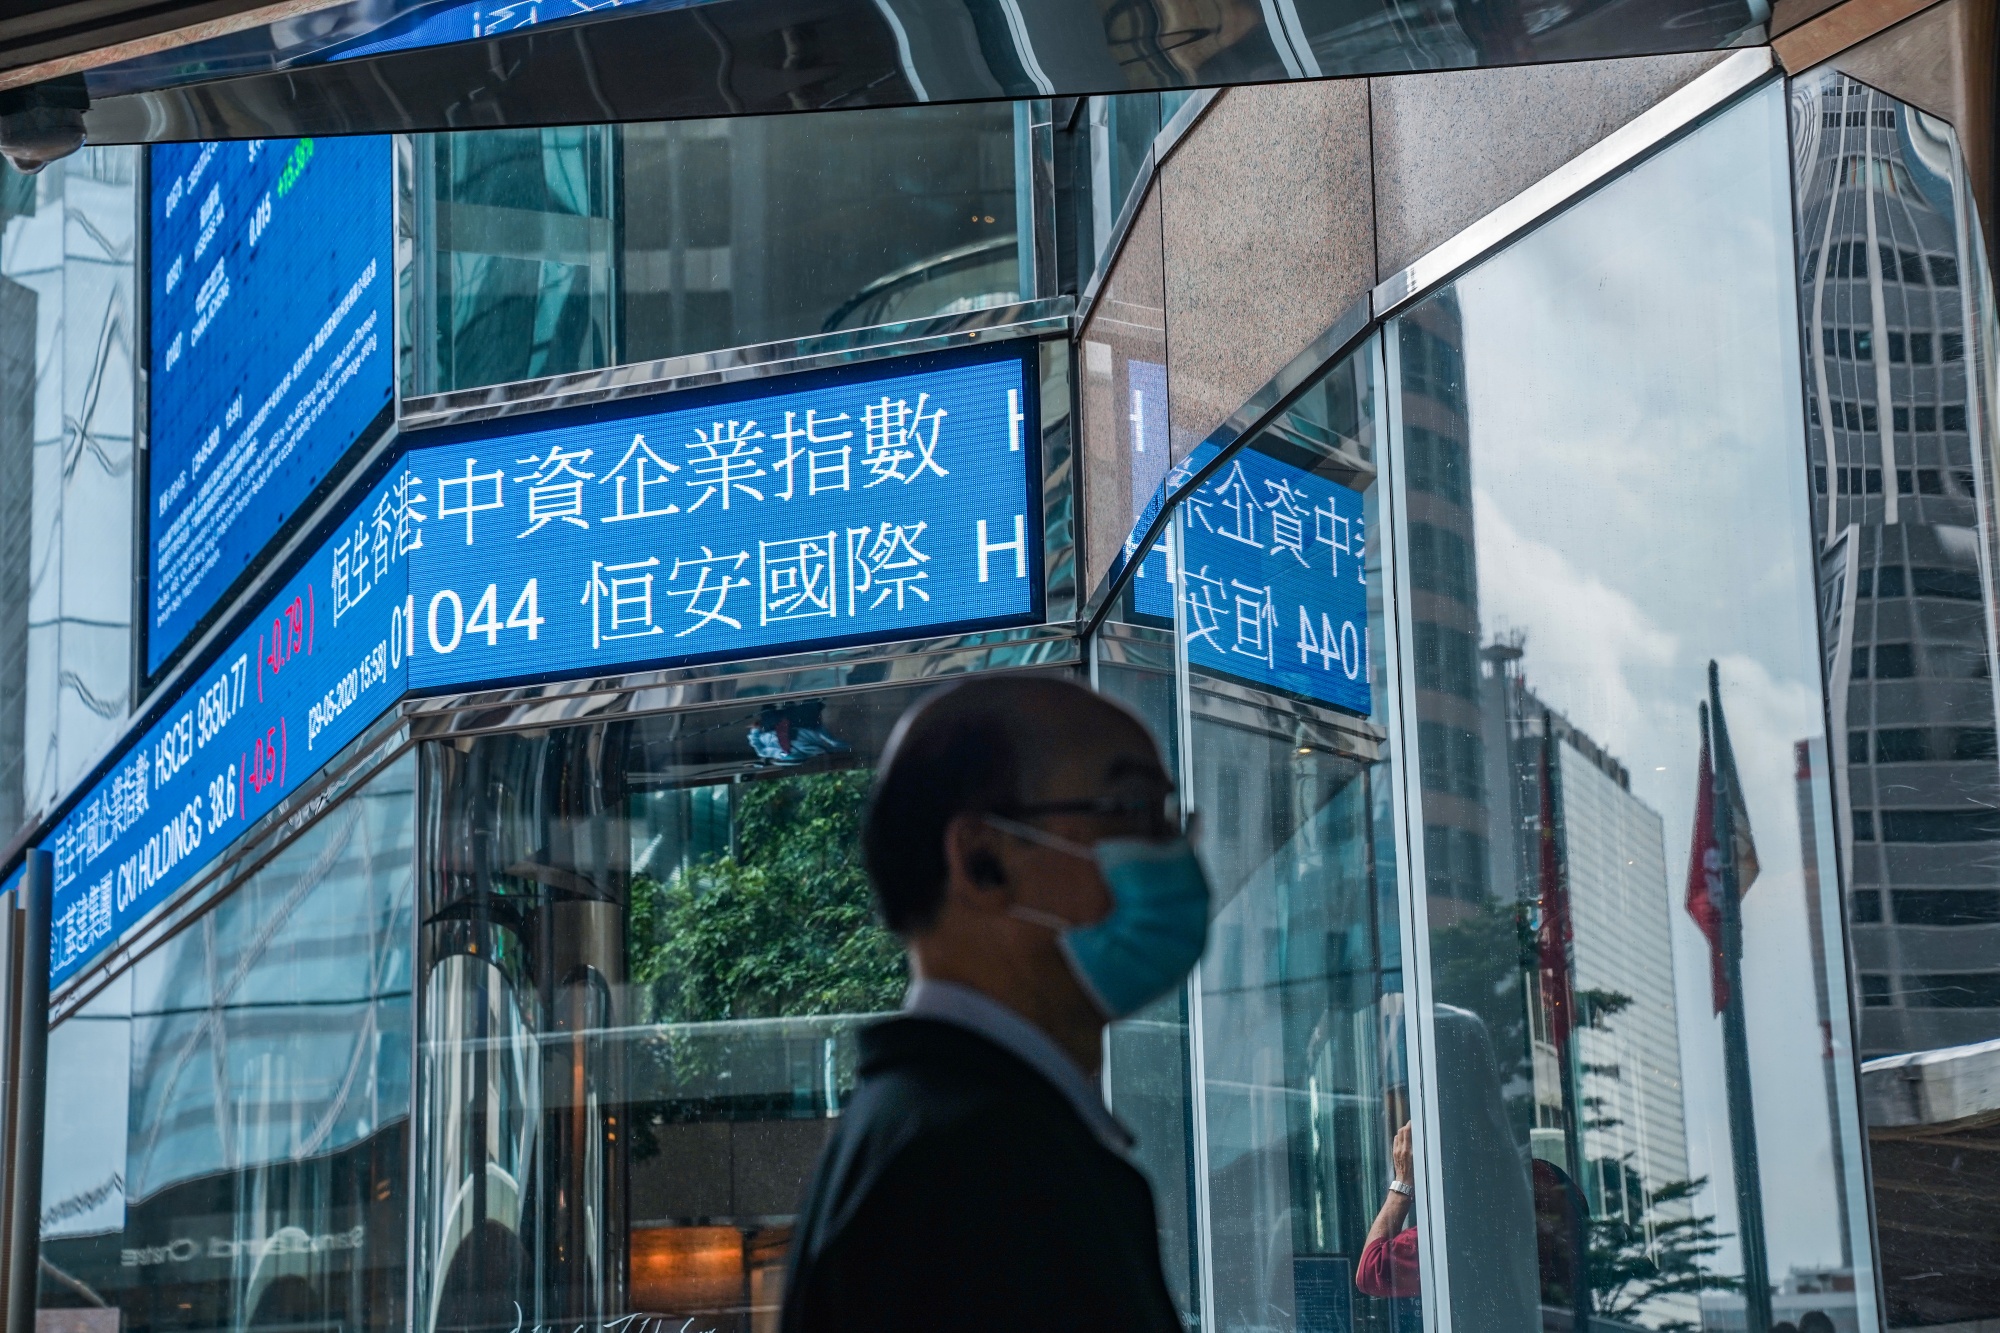 Battle for Hong Kong Is Shifting to City’s Financial Markets